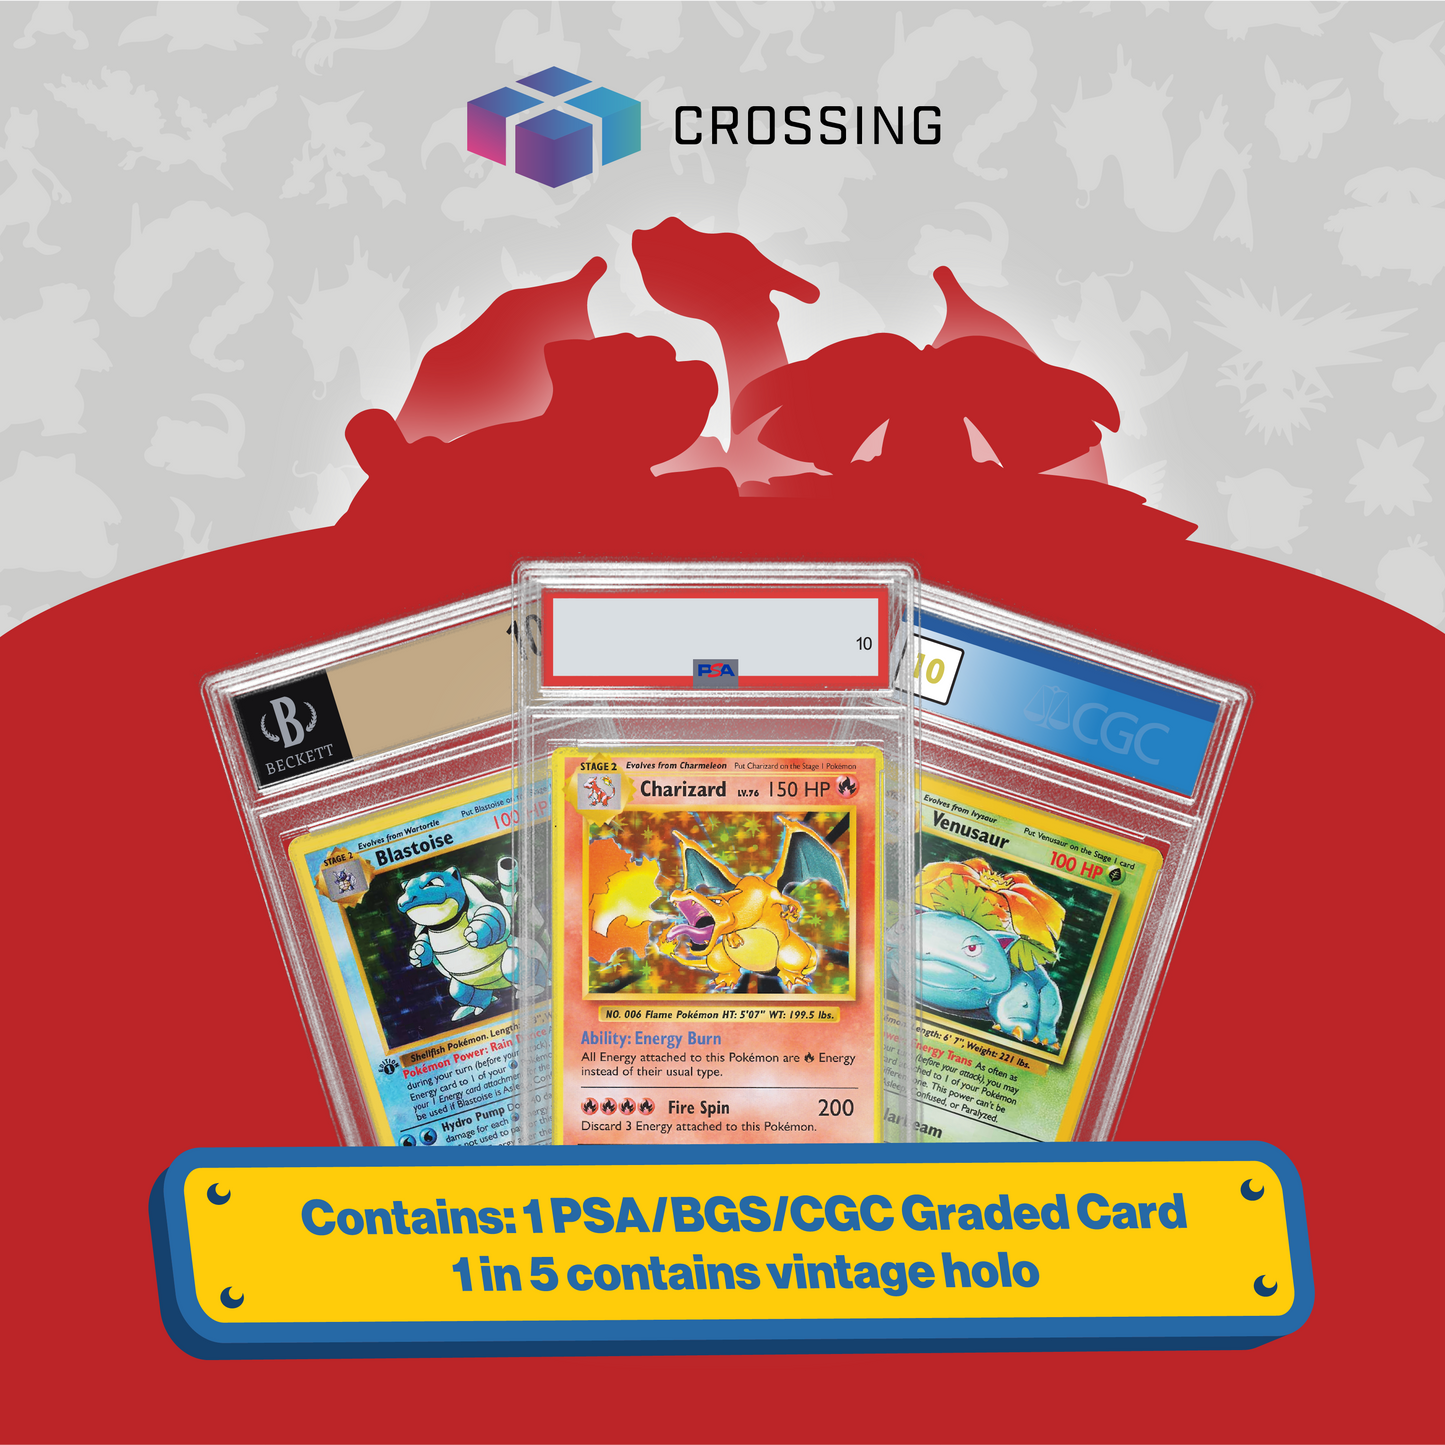 Crossing Selected - Slab Box (Recommended for Age 15+)